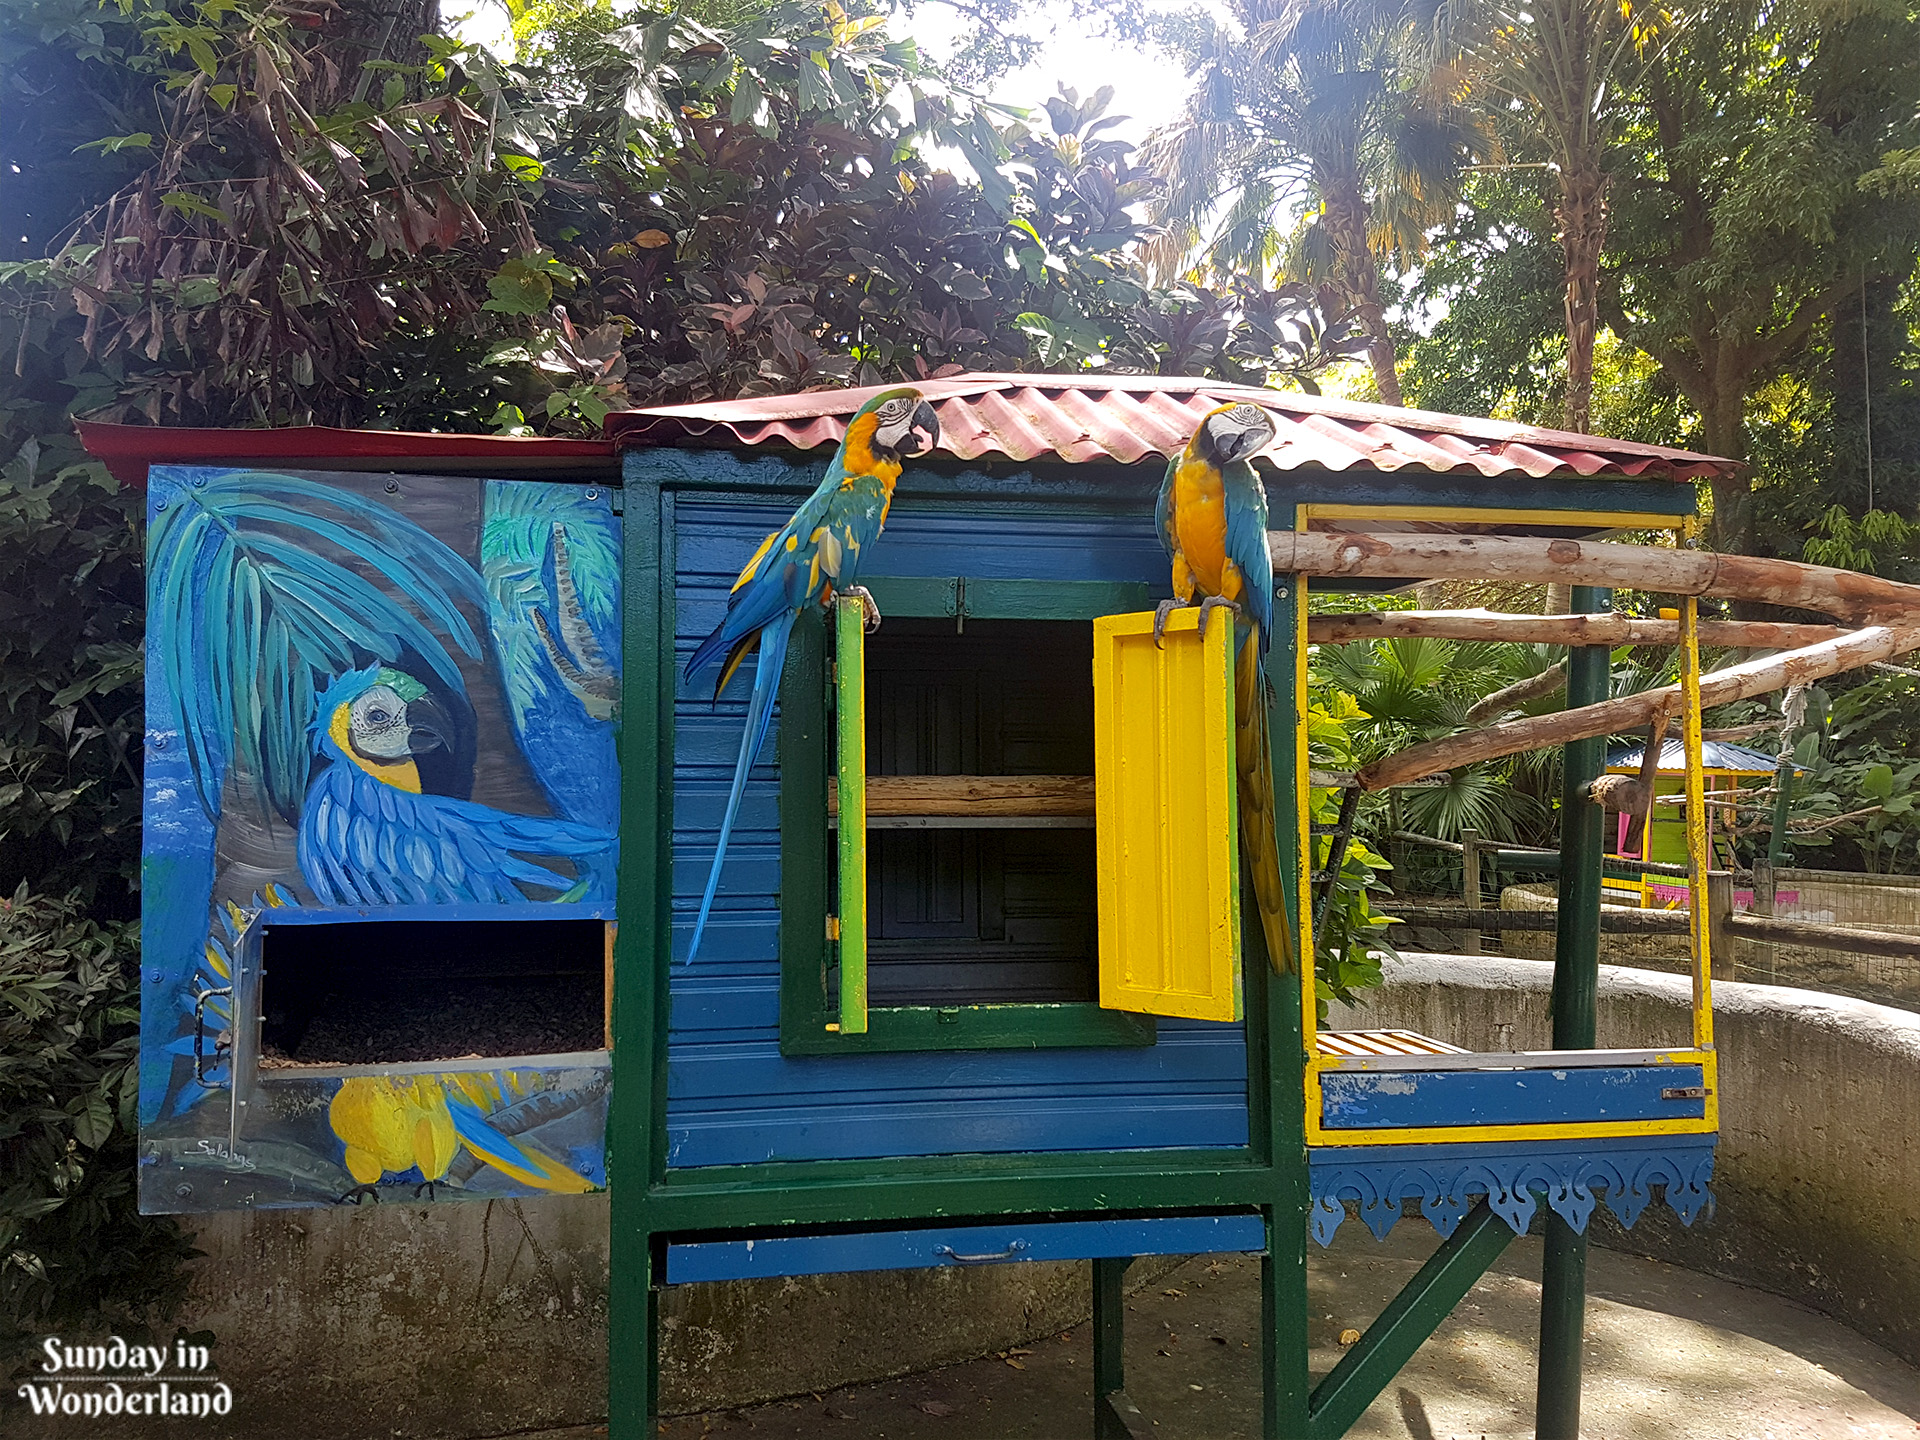 Two Ara parrots in a colorful house in Botanical Garden in Deshaies in Guadeloupe - Sunday in Wonderland Blog